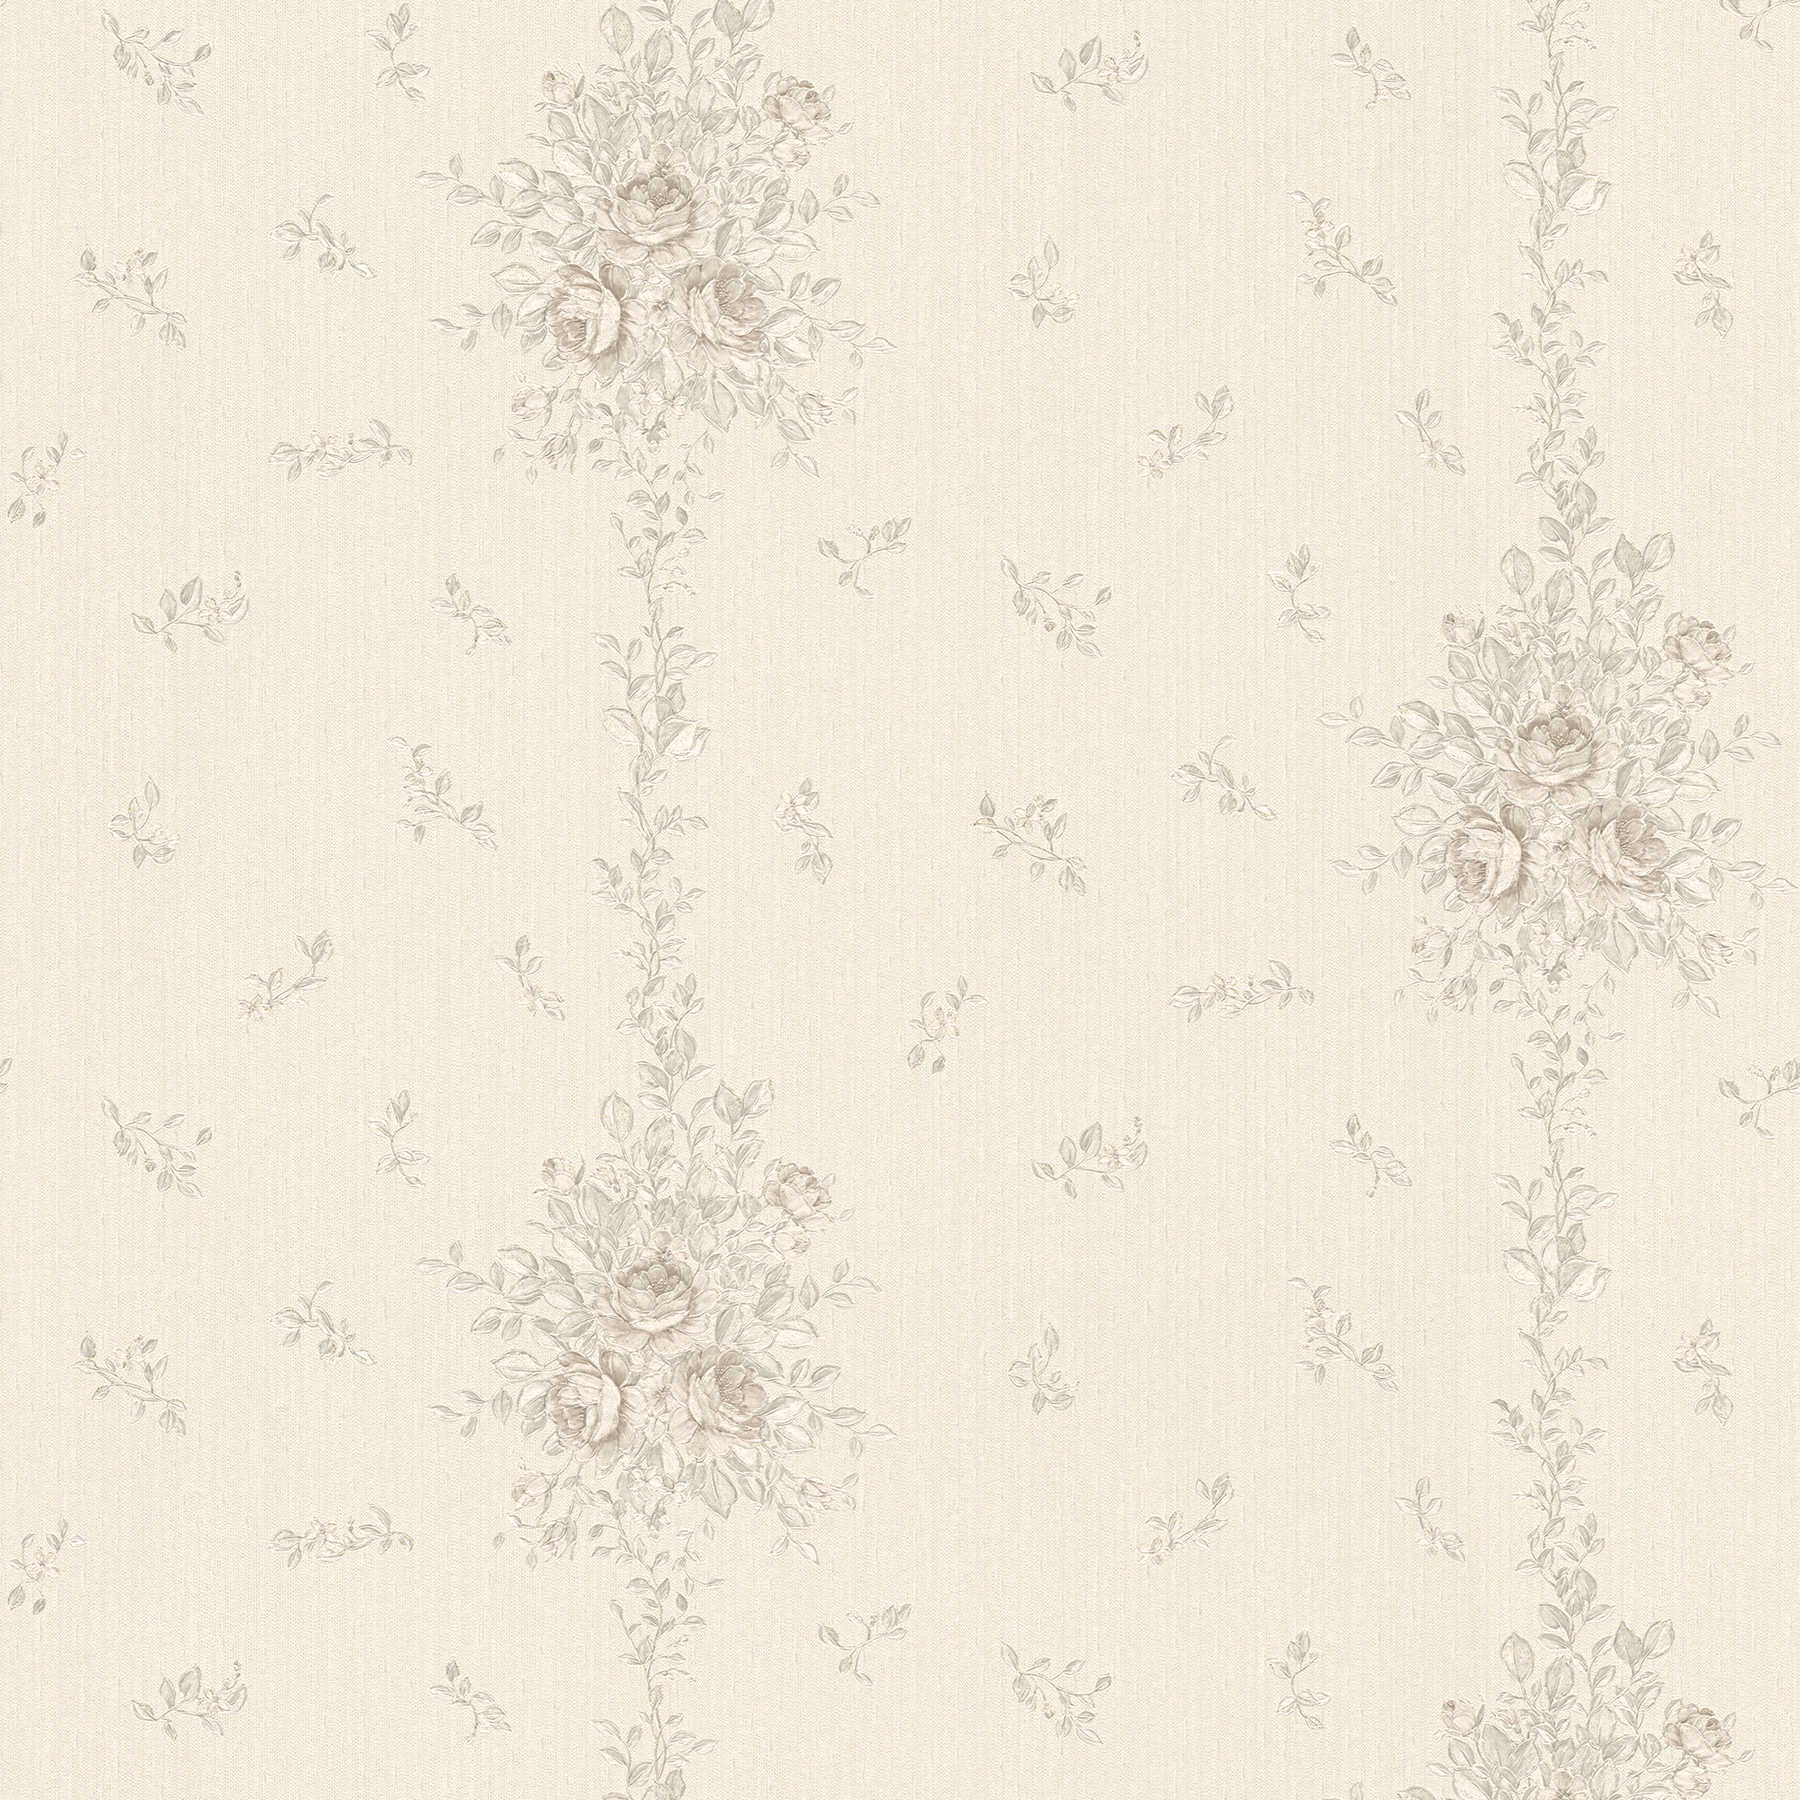 Roses wallpaper with flowers & stripes effect - grey, metallic
